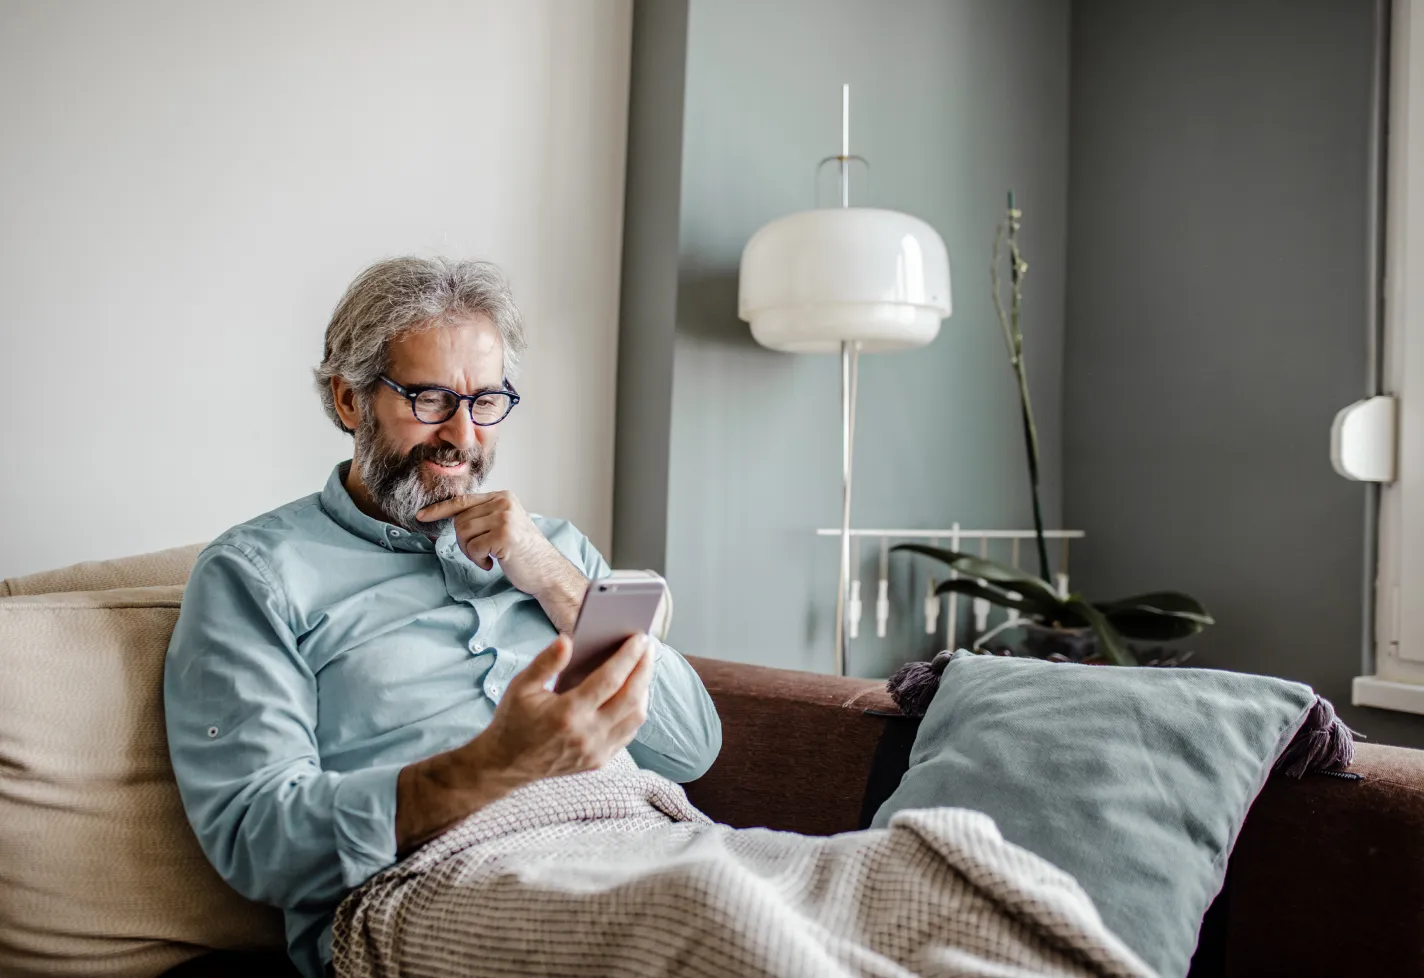 A man is sitting on the couch in his home as he smiles and reads information on his smart phone. 